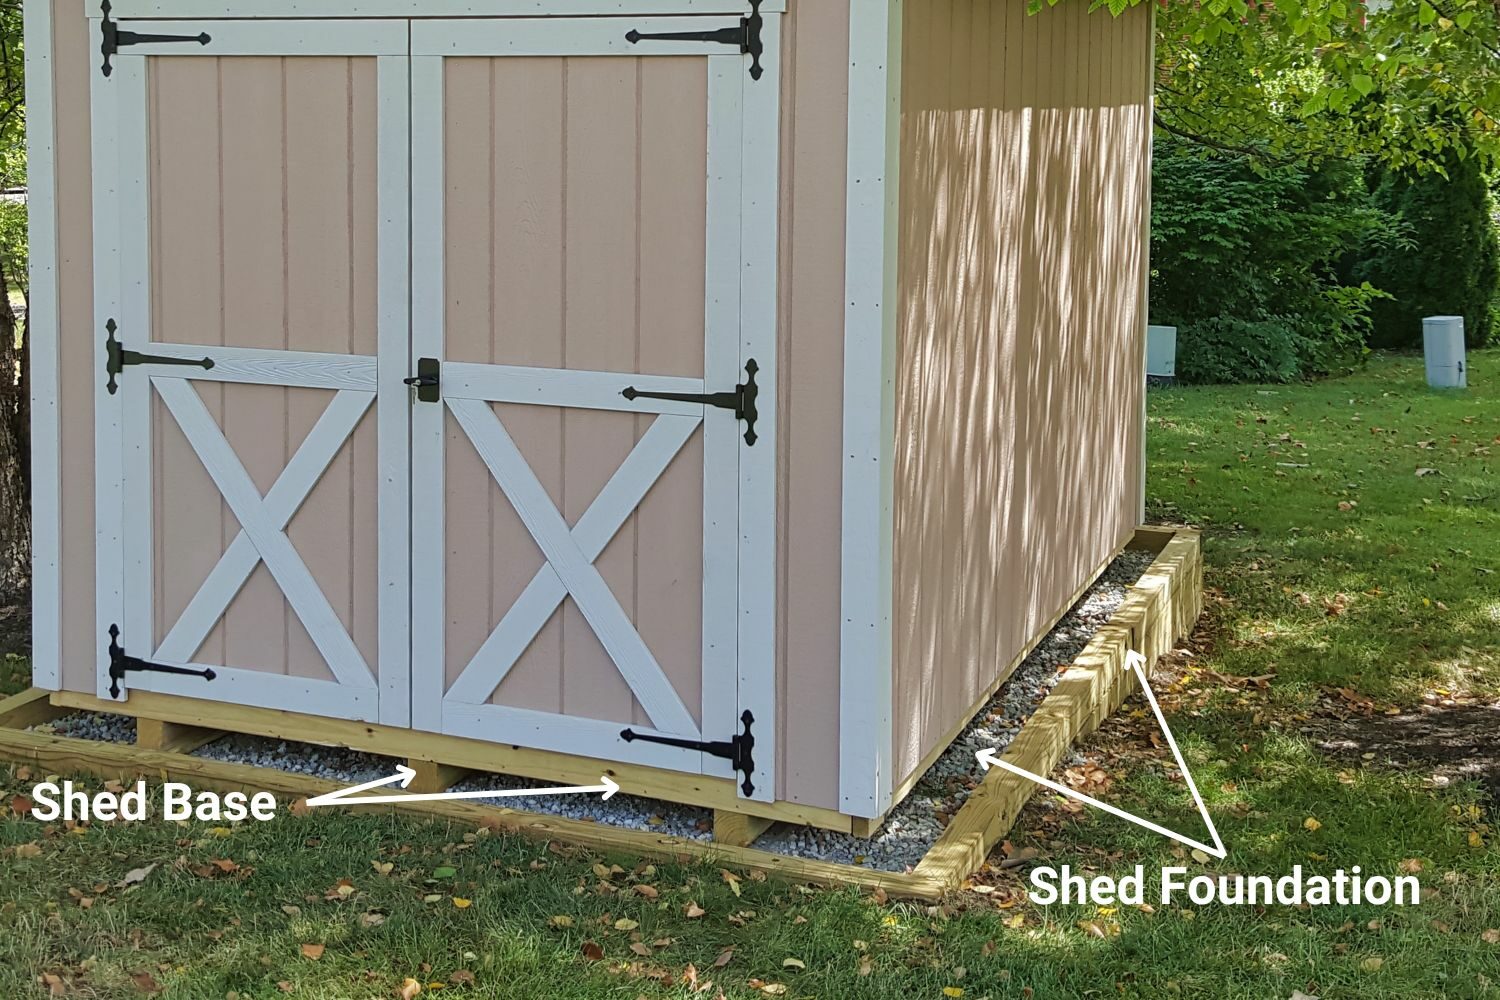 shed foundation vs shed base in ohio